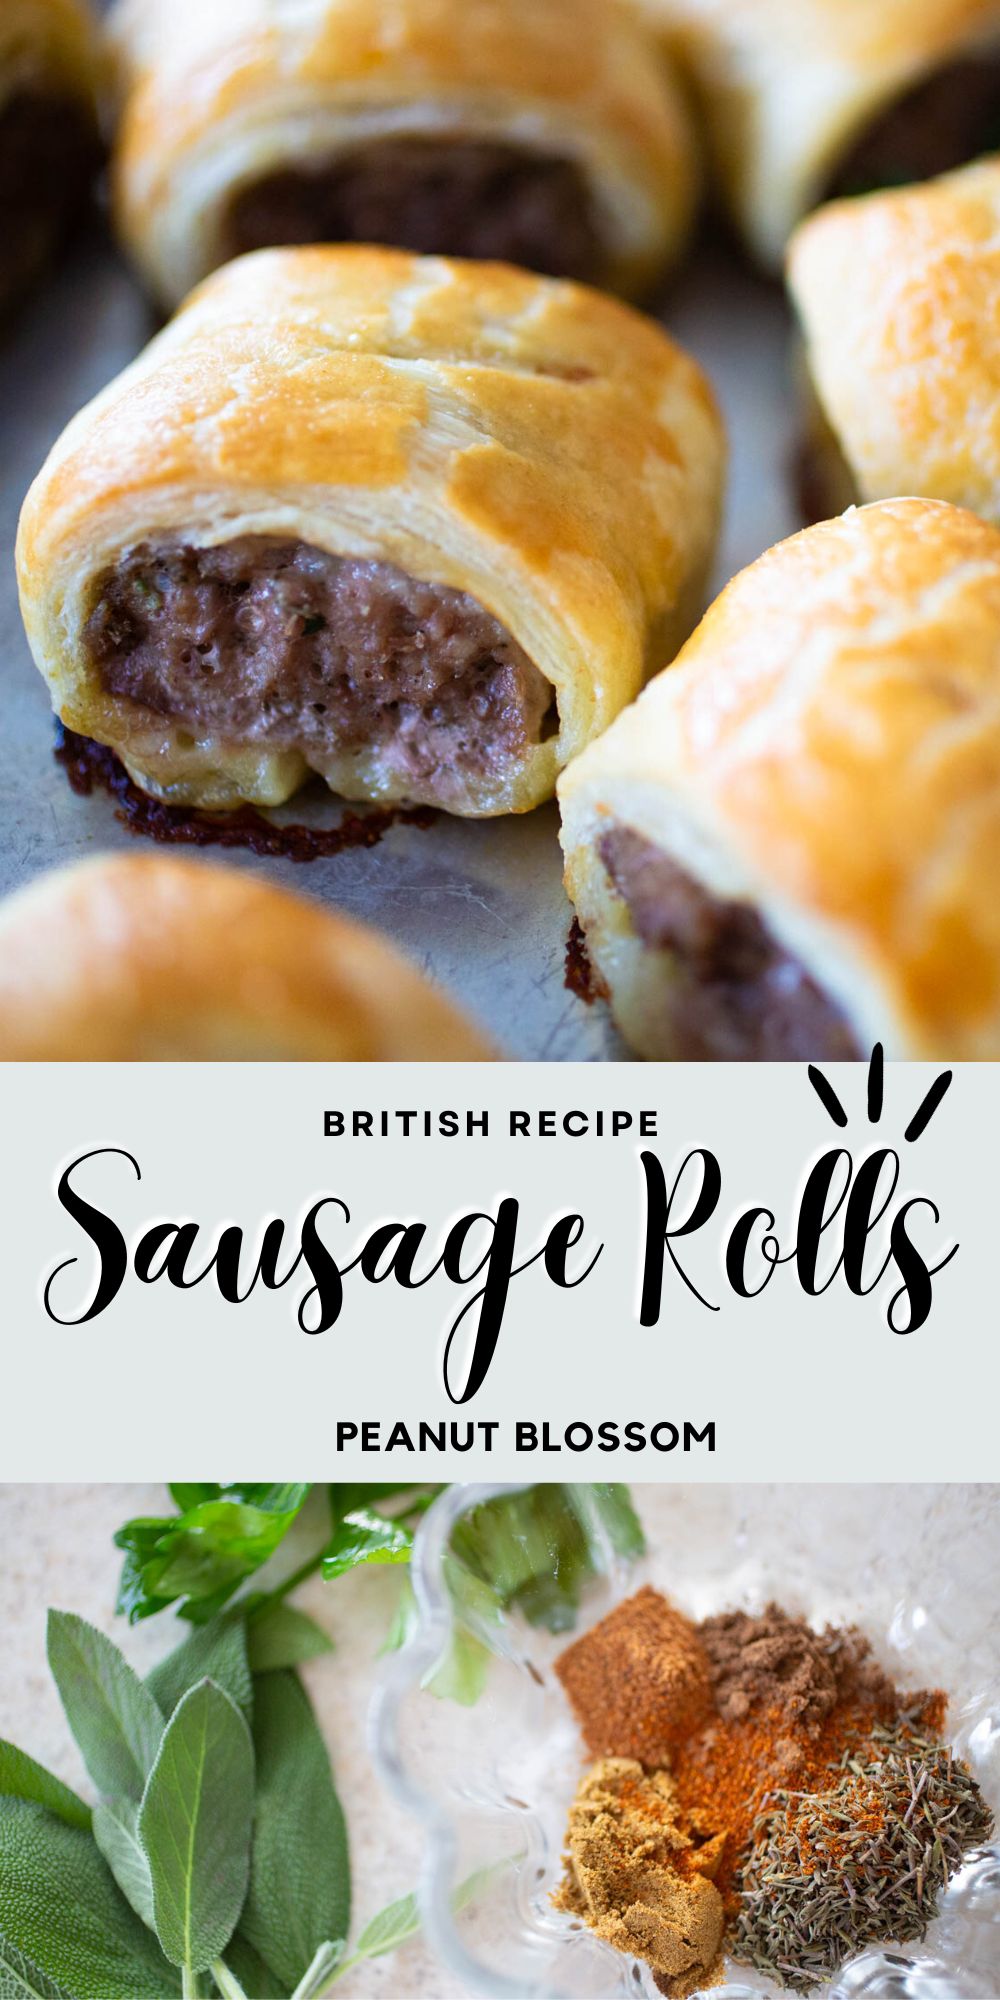 The photo collage shows the baked sausage rolls on top next to a photo of the herbs and seasonings used to flavor the sausage on the bottom.